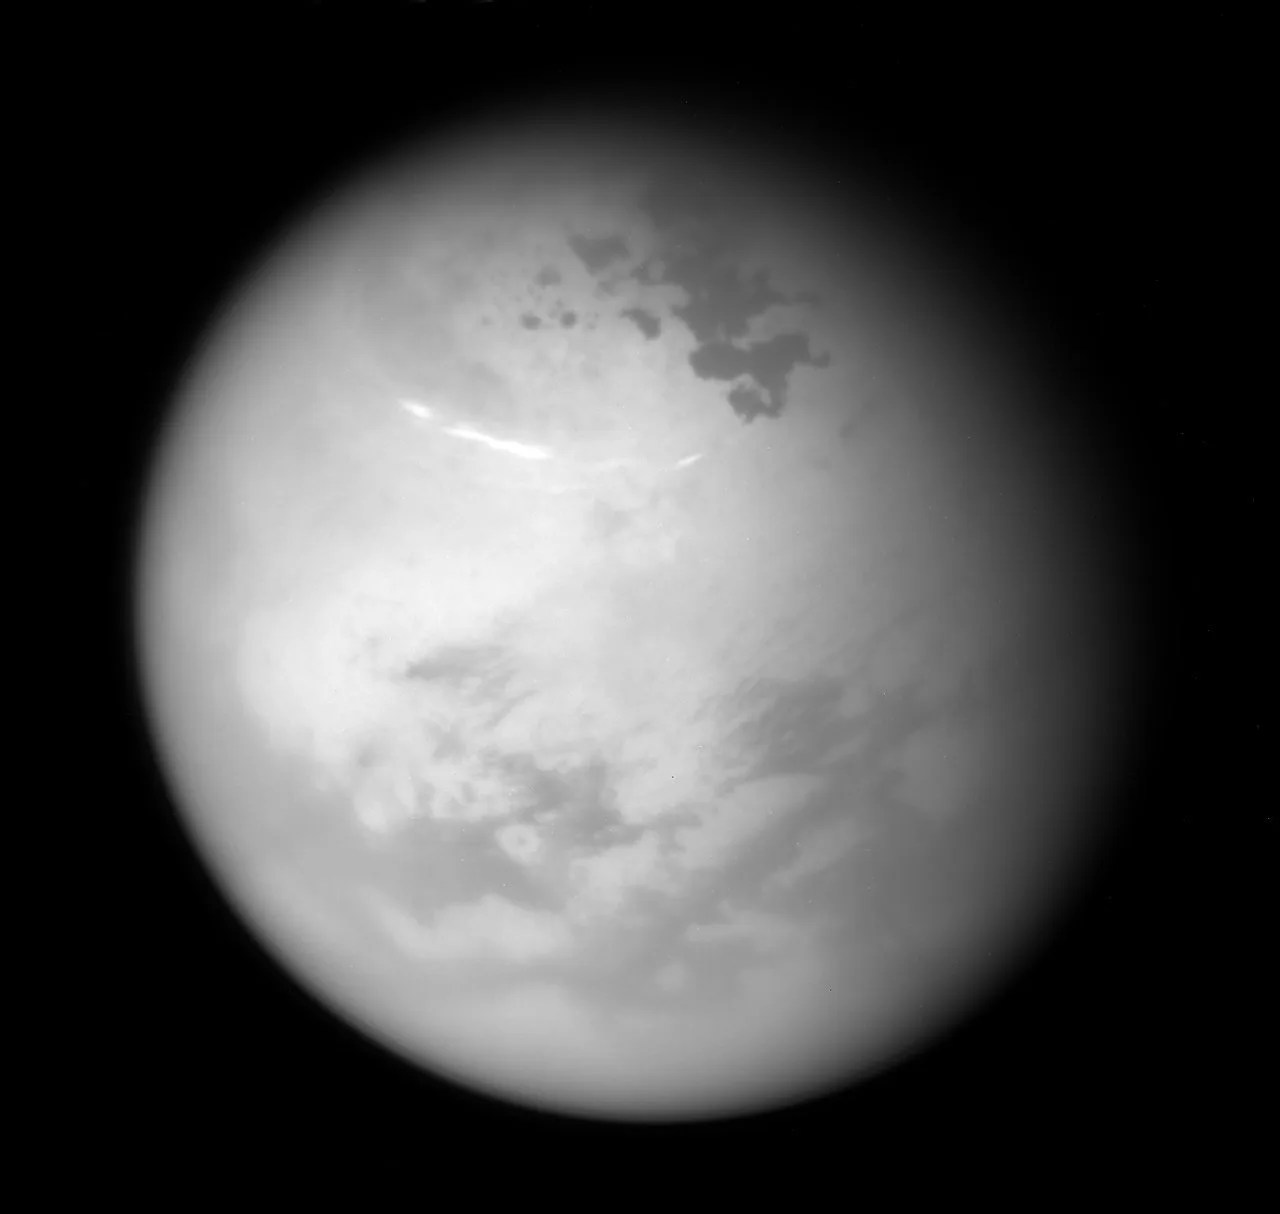 NASA's Cassini spacecraft sees bright methane clouds drifting in the summer skies of Saturn's moon Titan, along with dark hydrocarbon lakes and seas clustered around the north pole. › Full image and caption